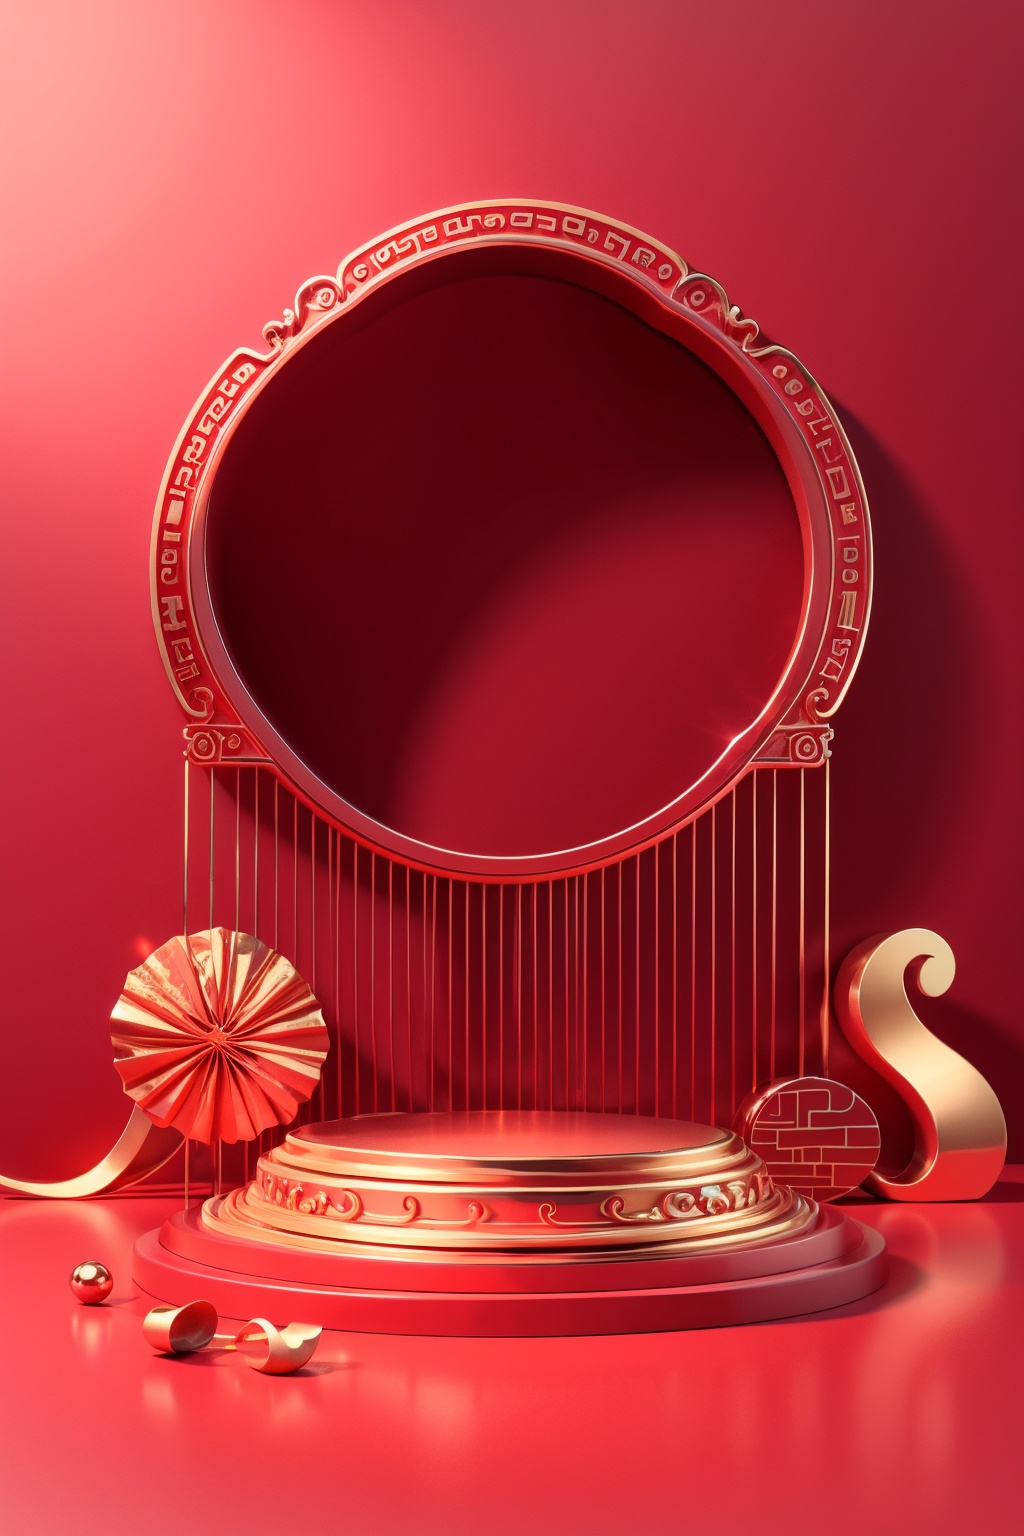 masterpiece,best quality,CNY_stage,red theme, still life, no humans, ring, jewelry, red background, ribbon, shadow, ornate ring, wedding ring